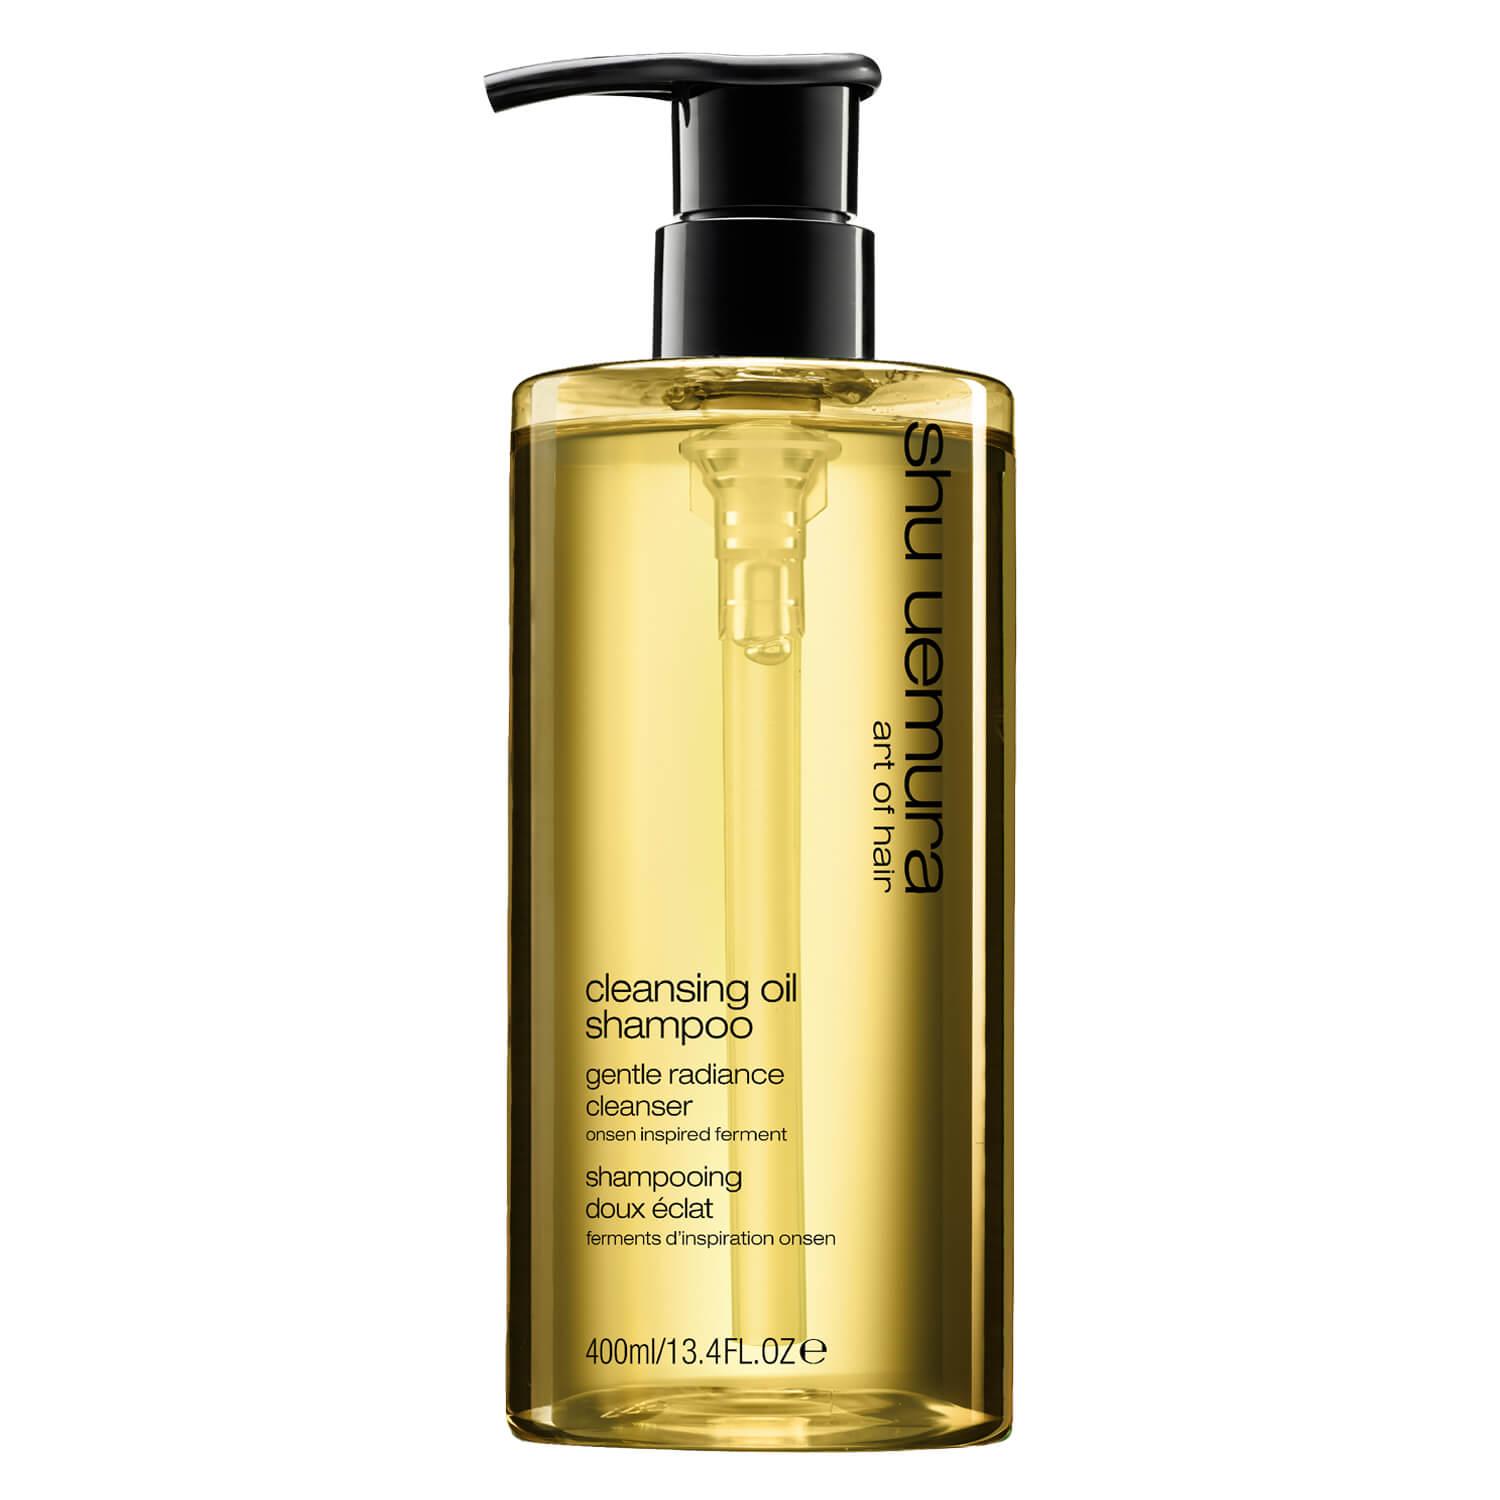 Cleansing Oil - Shampoo Gentle Radiance Cleanser